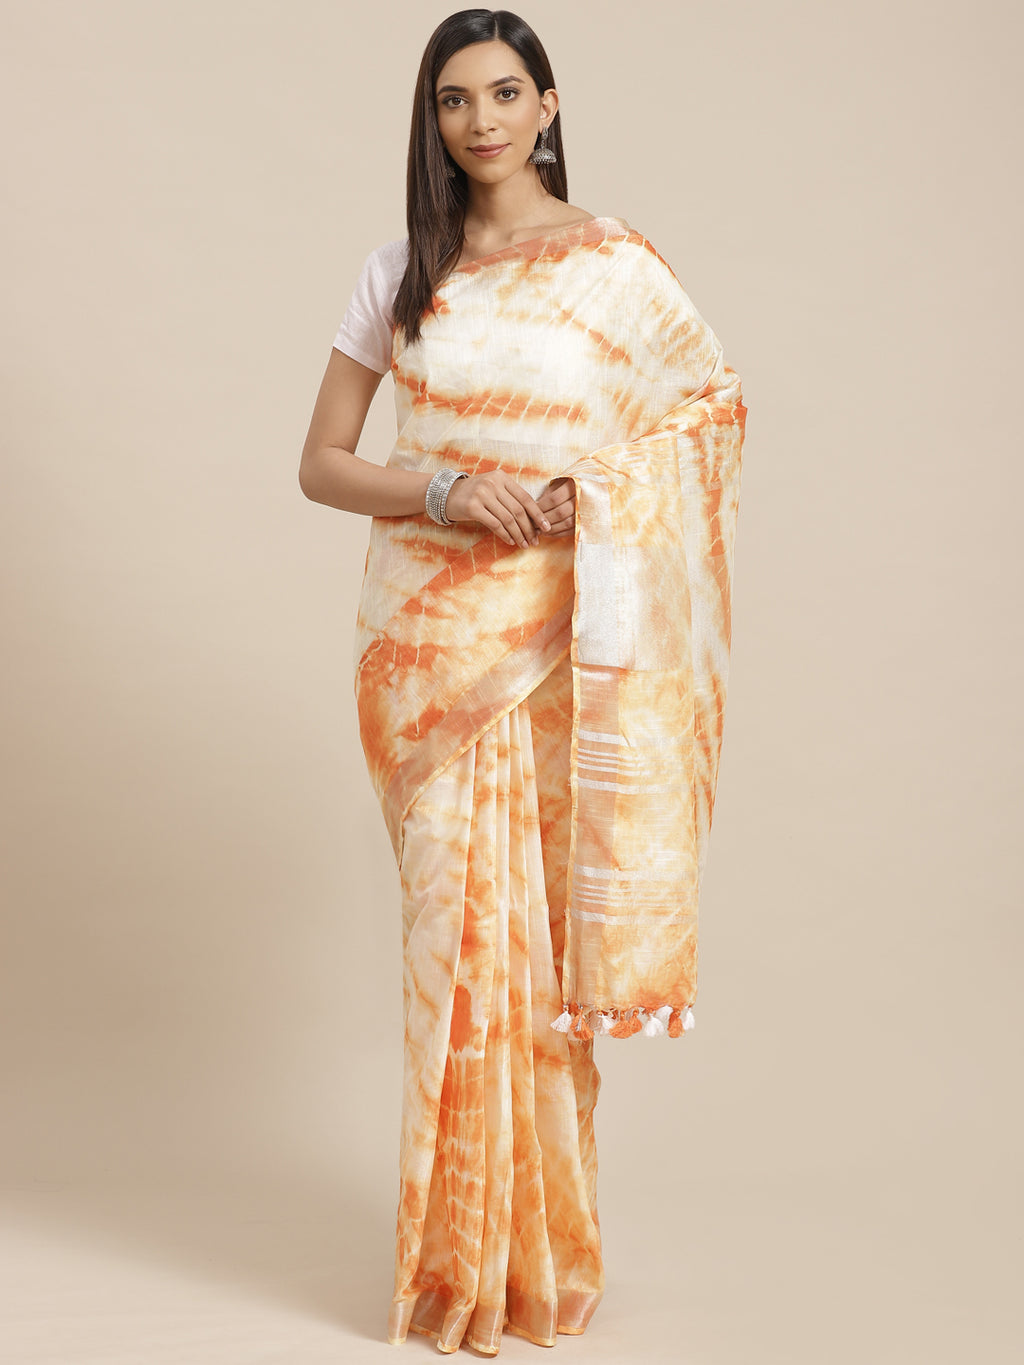 Orange and White, Kalakari India Linen Shibori Woven Saree and Blouse ALBGSA0061-Saree-Kalakari India-ALBGSA0061-Cotton, Geographical Indication, Hand Crafted, Heritage Prints, Linen, Natural Dyes, Red, Sarees, Shibori, Sustainable Fabrics, Woven, Yellow-[Linen,Ethnic,wear,Fashionista,Handloom,Handicraft,Indigo,blockprint,block,print,Cotton,Chanderi,Blue, latest,classy,party,bollywood,trendy,summer,style,traditional,formal,elegant,unique,style,hand,block,print, dabu,booti,gift,present,glamorous,